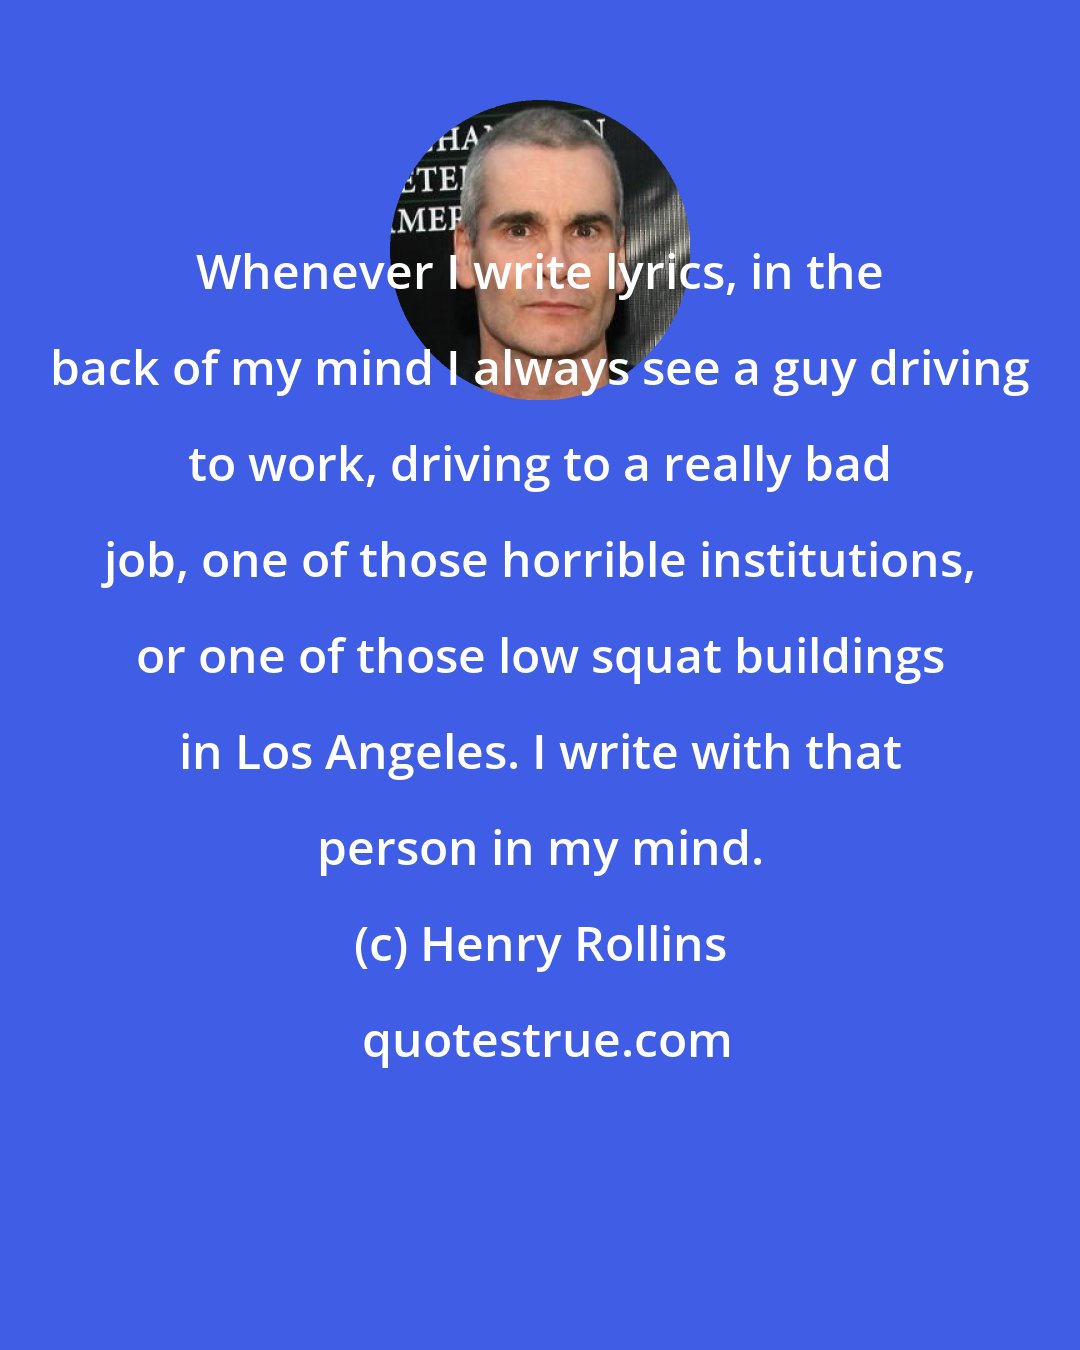 Henry Rollins: Whenever I write lyrics, in the back of my mind I always see a guy driving to work, driving to a really bad job, one of those horrible institutions, or one of those low squat buildings in Los Angeles. I write with that person in my mind.